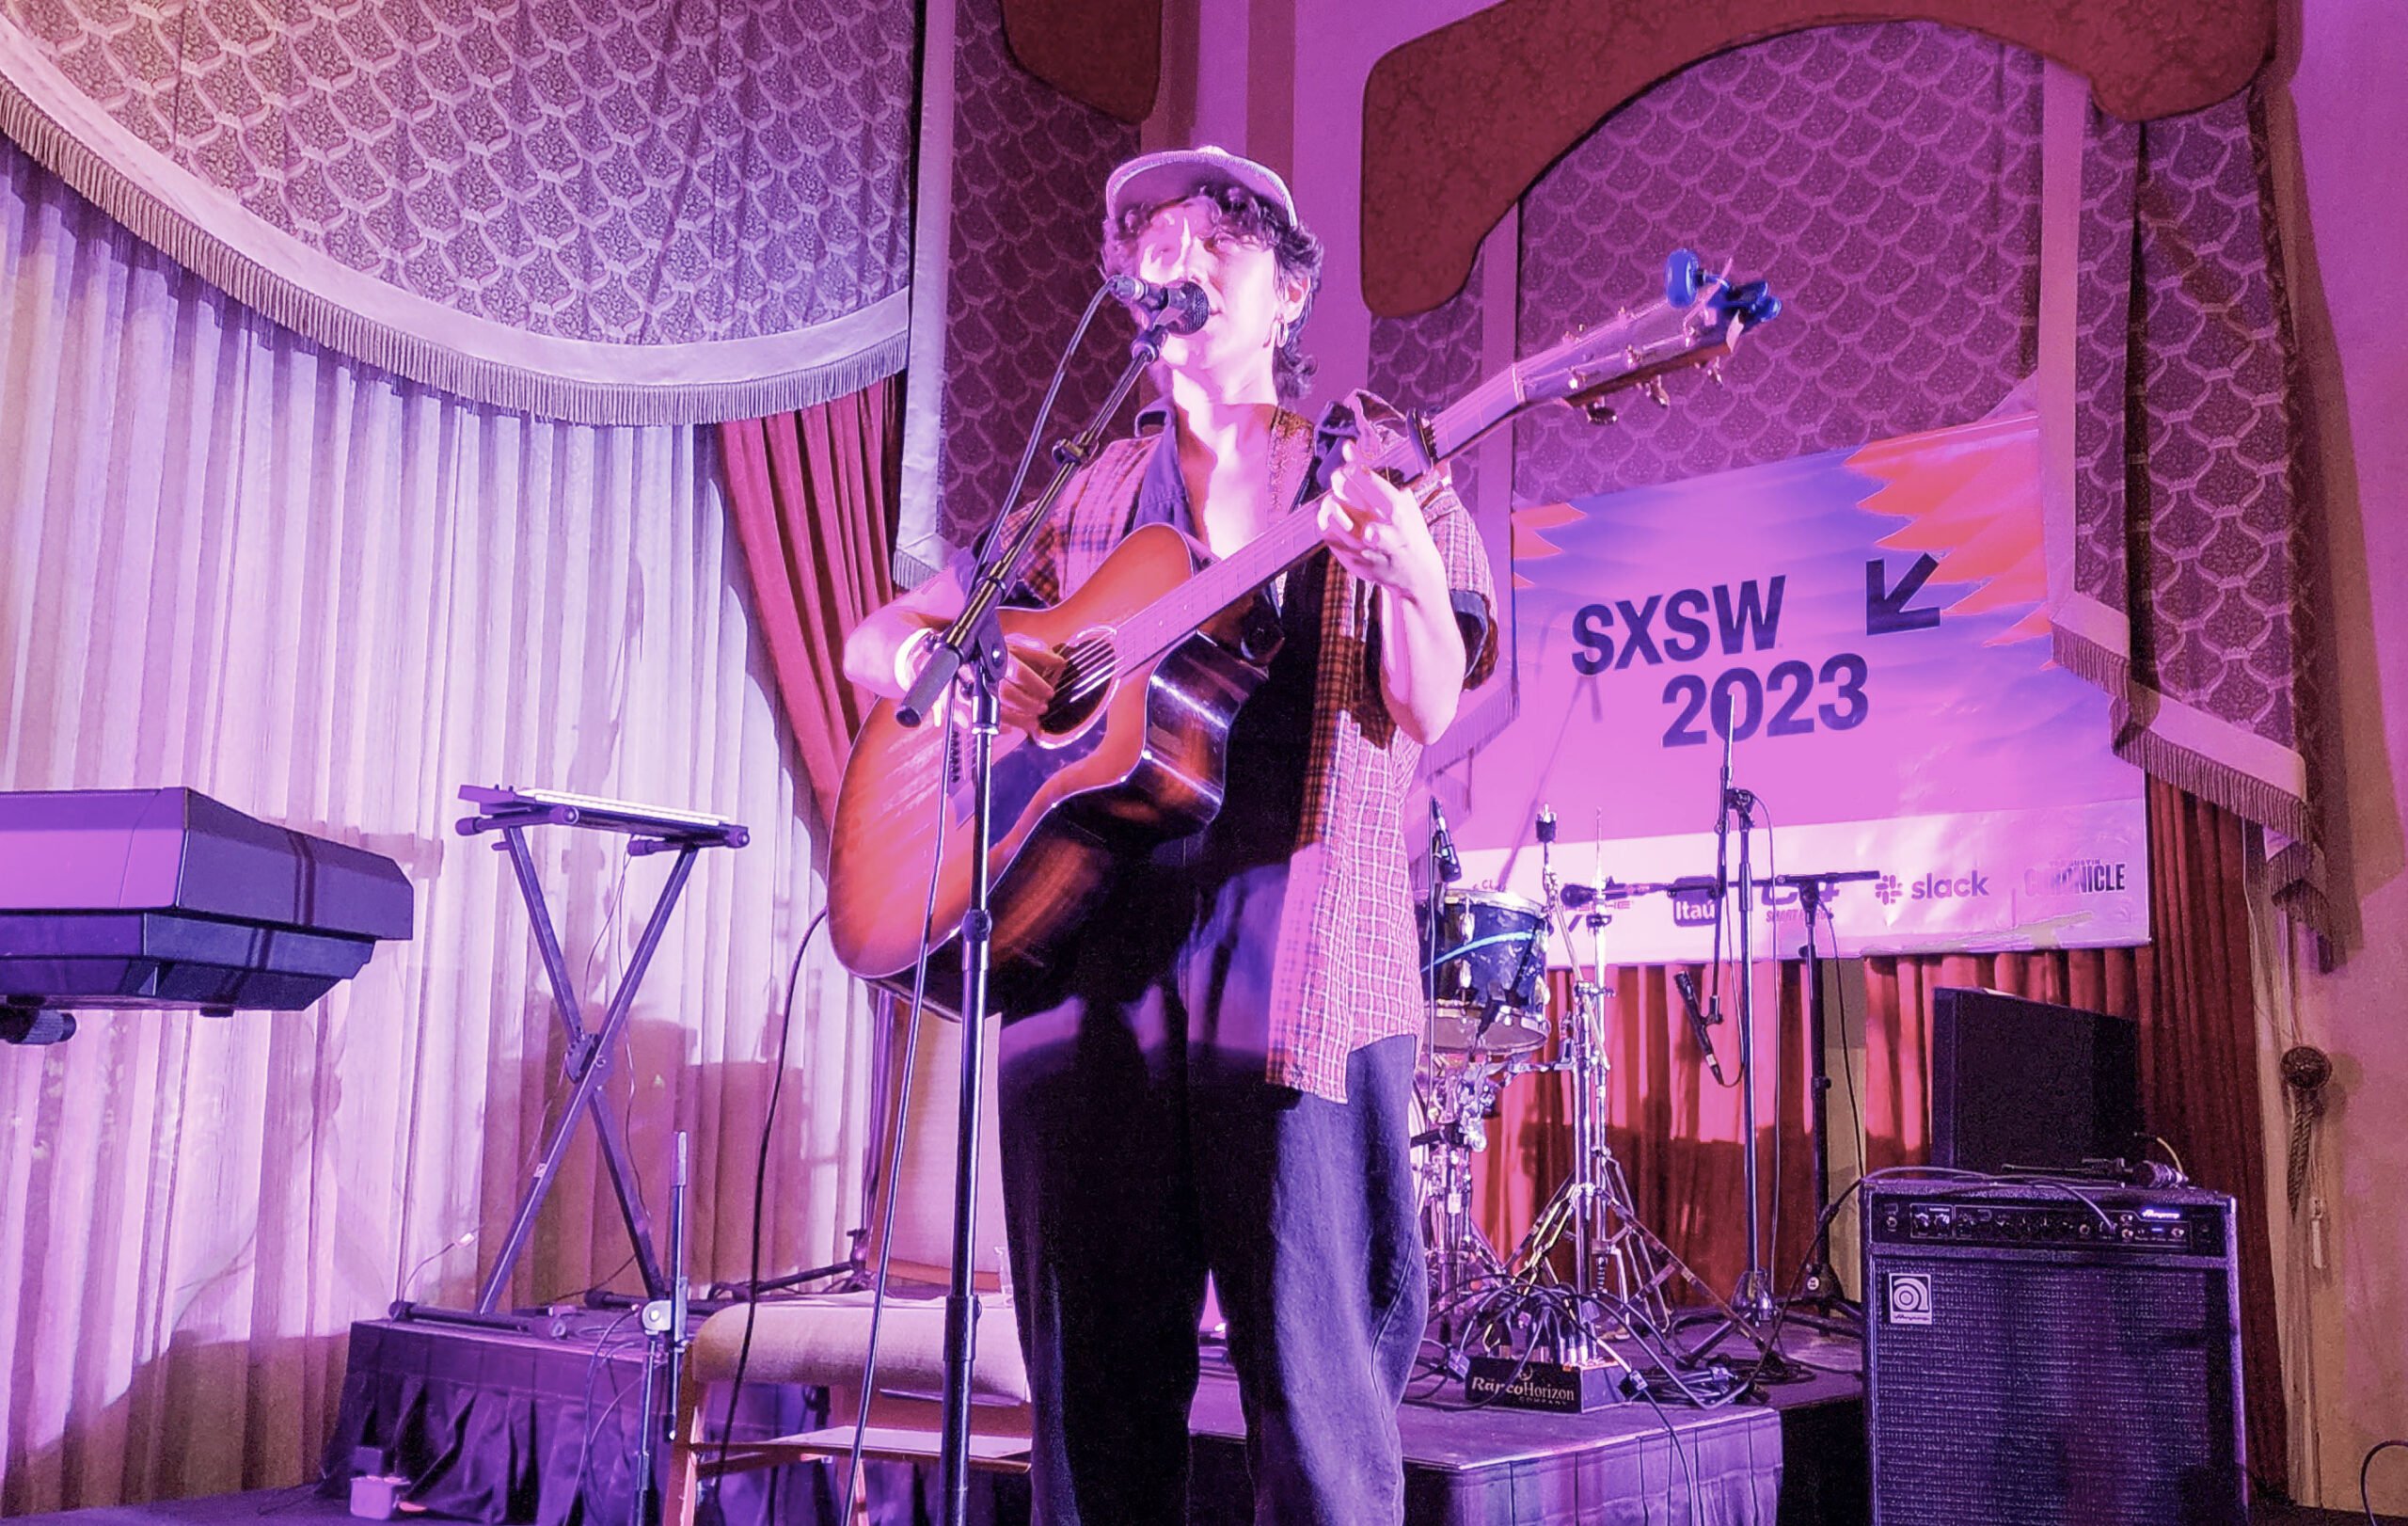 Olive Klug is a white nonbinary person wearing a floppy newsie hat over their curly dark brown hair, a flannel shirt, a v-neck tee and baggy blue jeans. They are playing a guitar on stage alone, surrounded by instruments. On the walls are antique looking draperies and a SXSW 2023 banner.